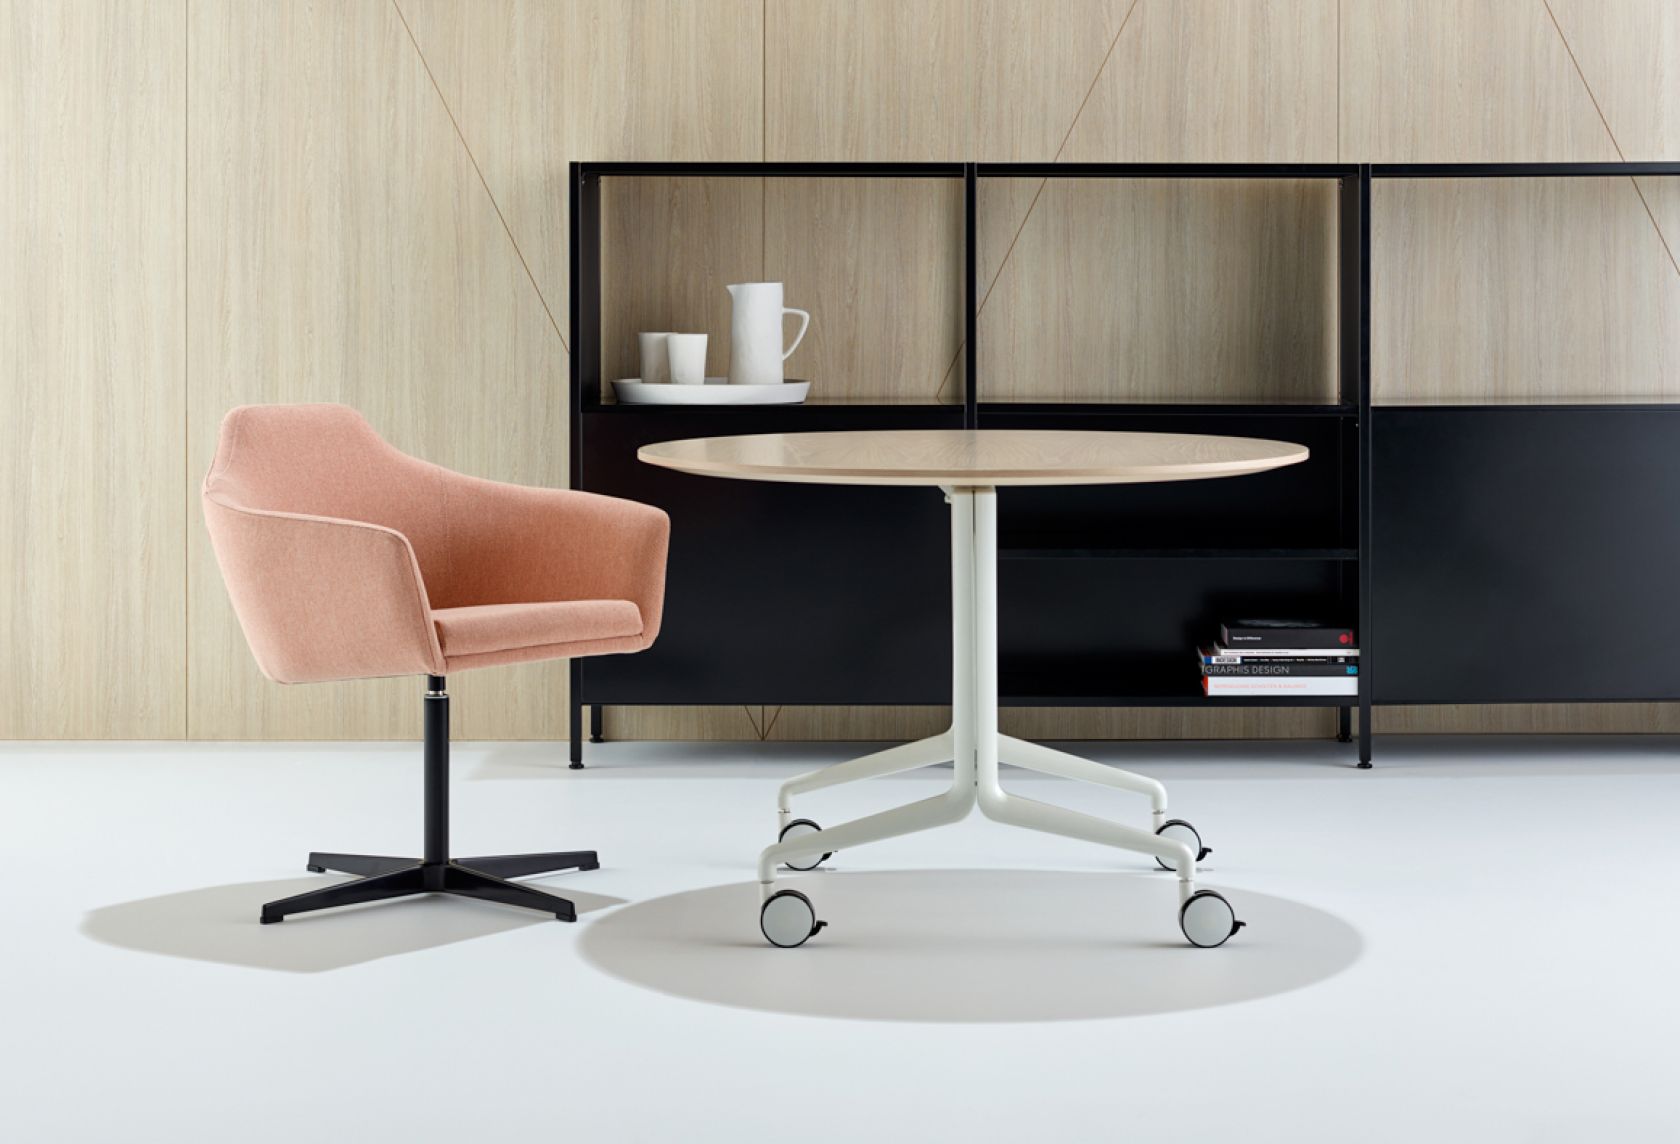 Kase Storage black, Palomino Chair and Aire Fold Table